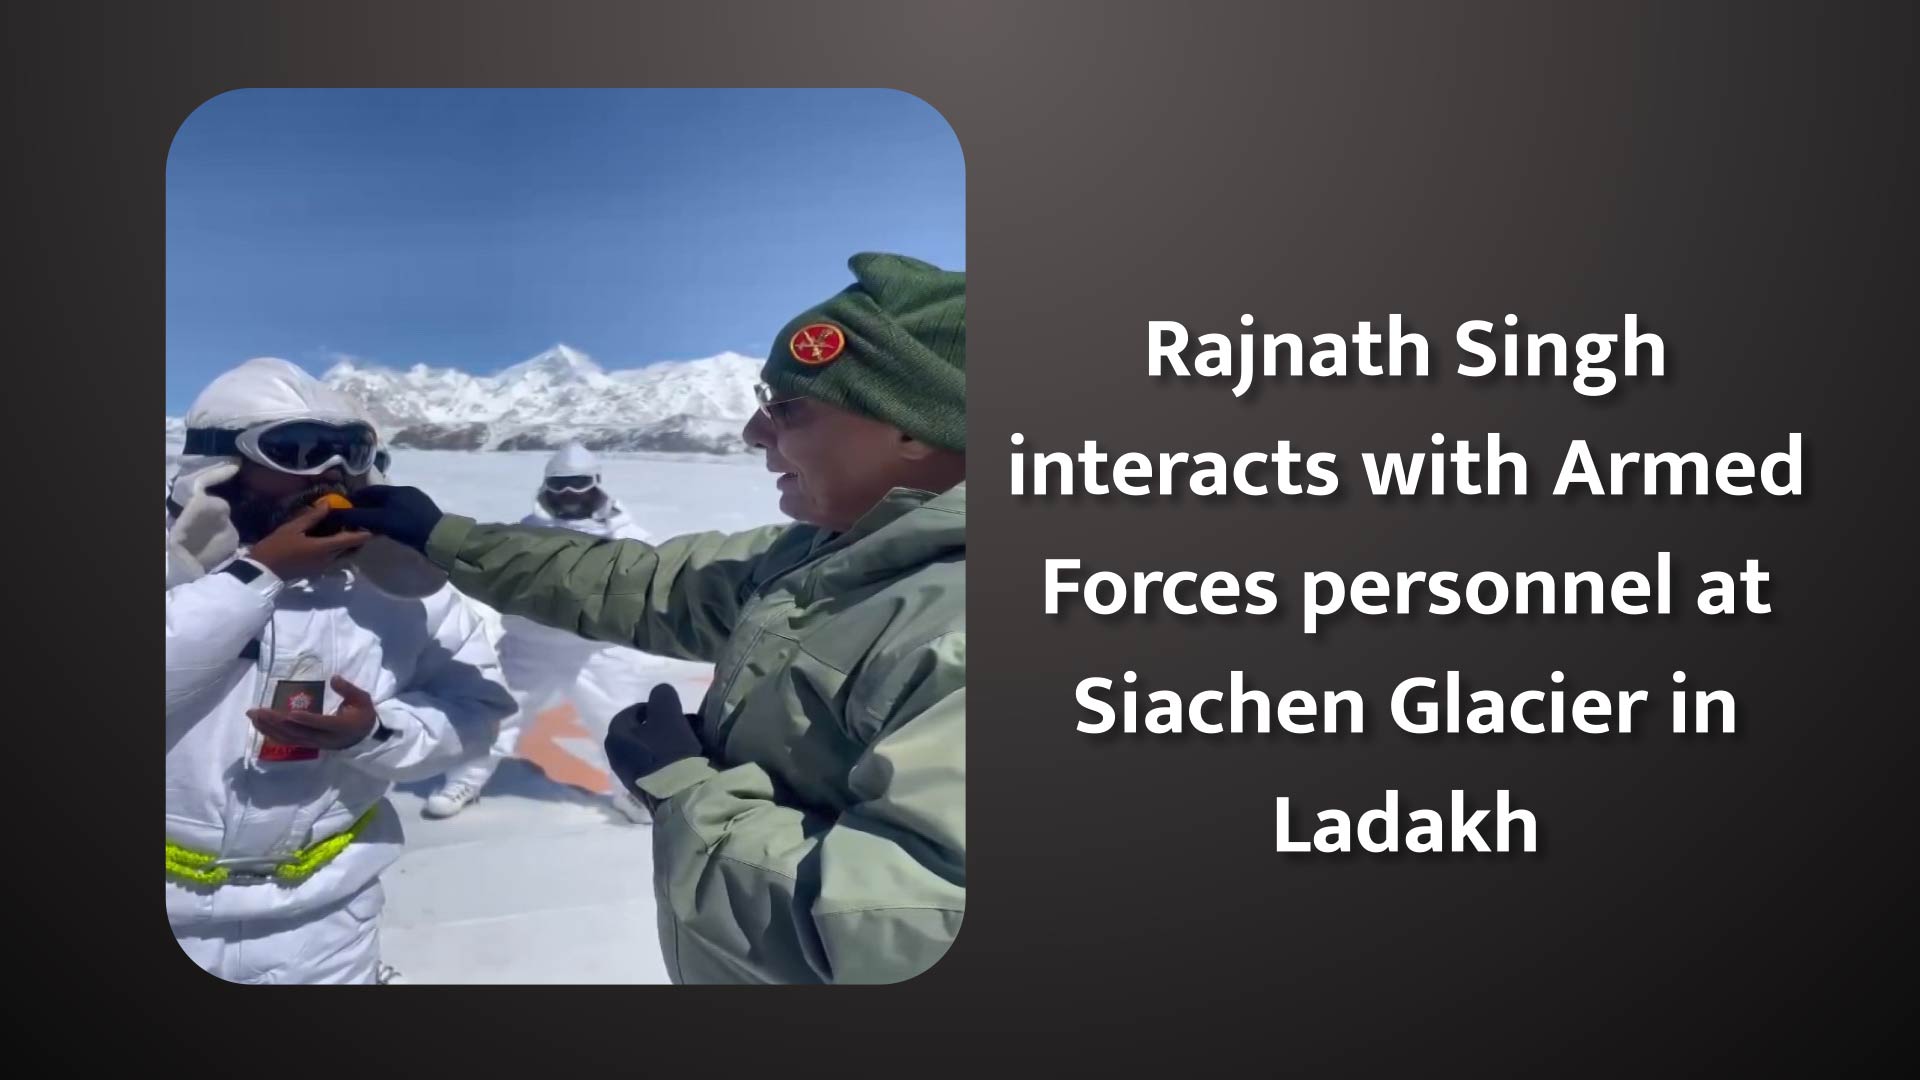 Rajnath Singh interacts with the Armed Forces personnel at Siachen Glacier in Ladakh